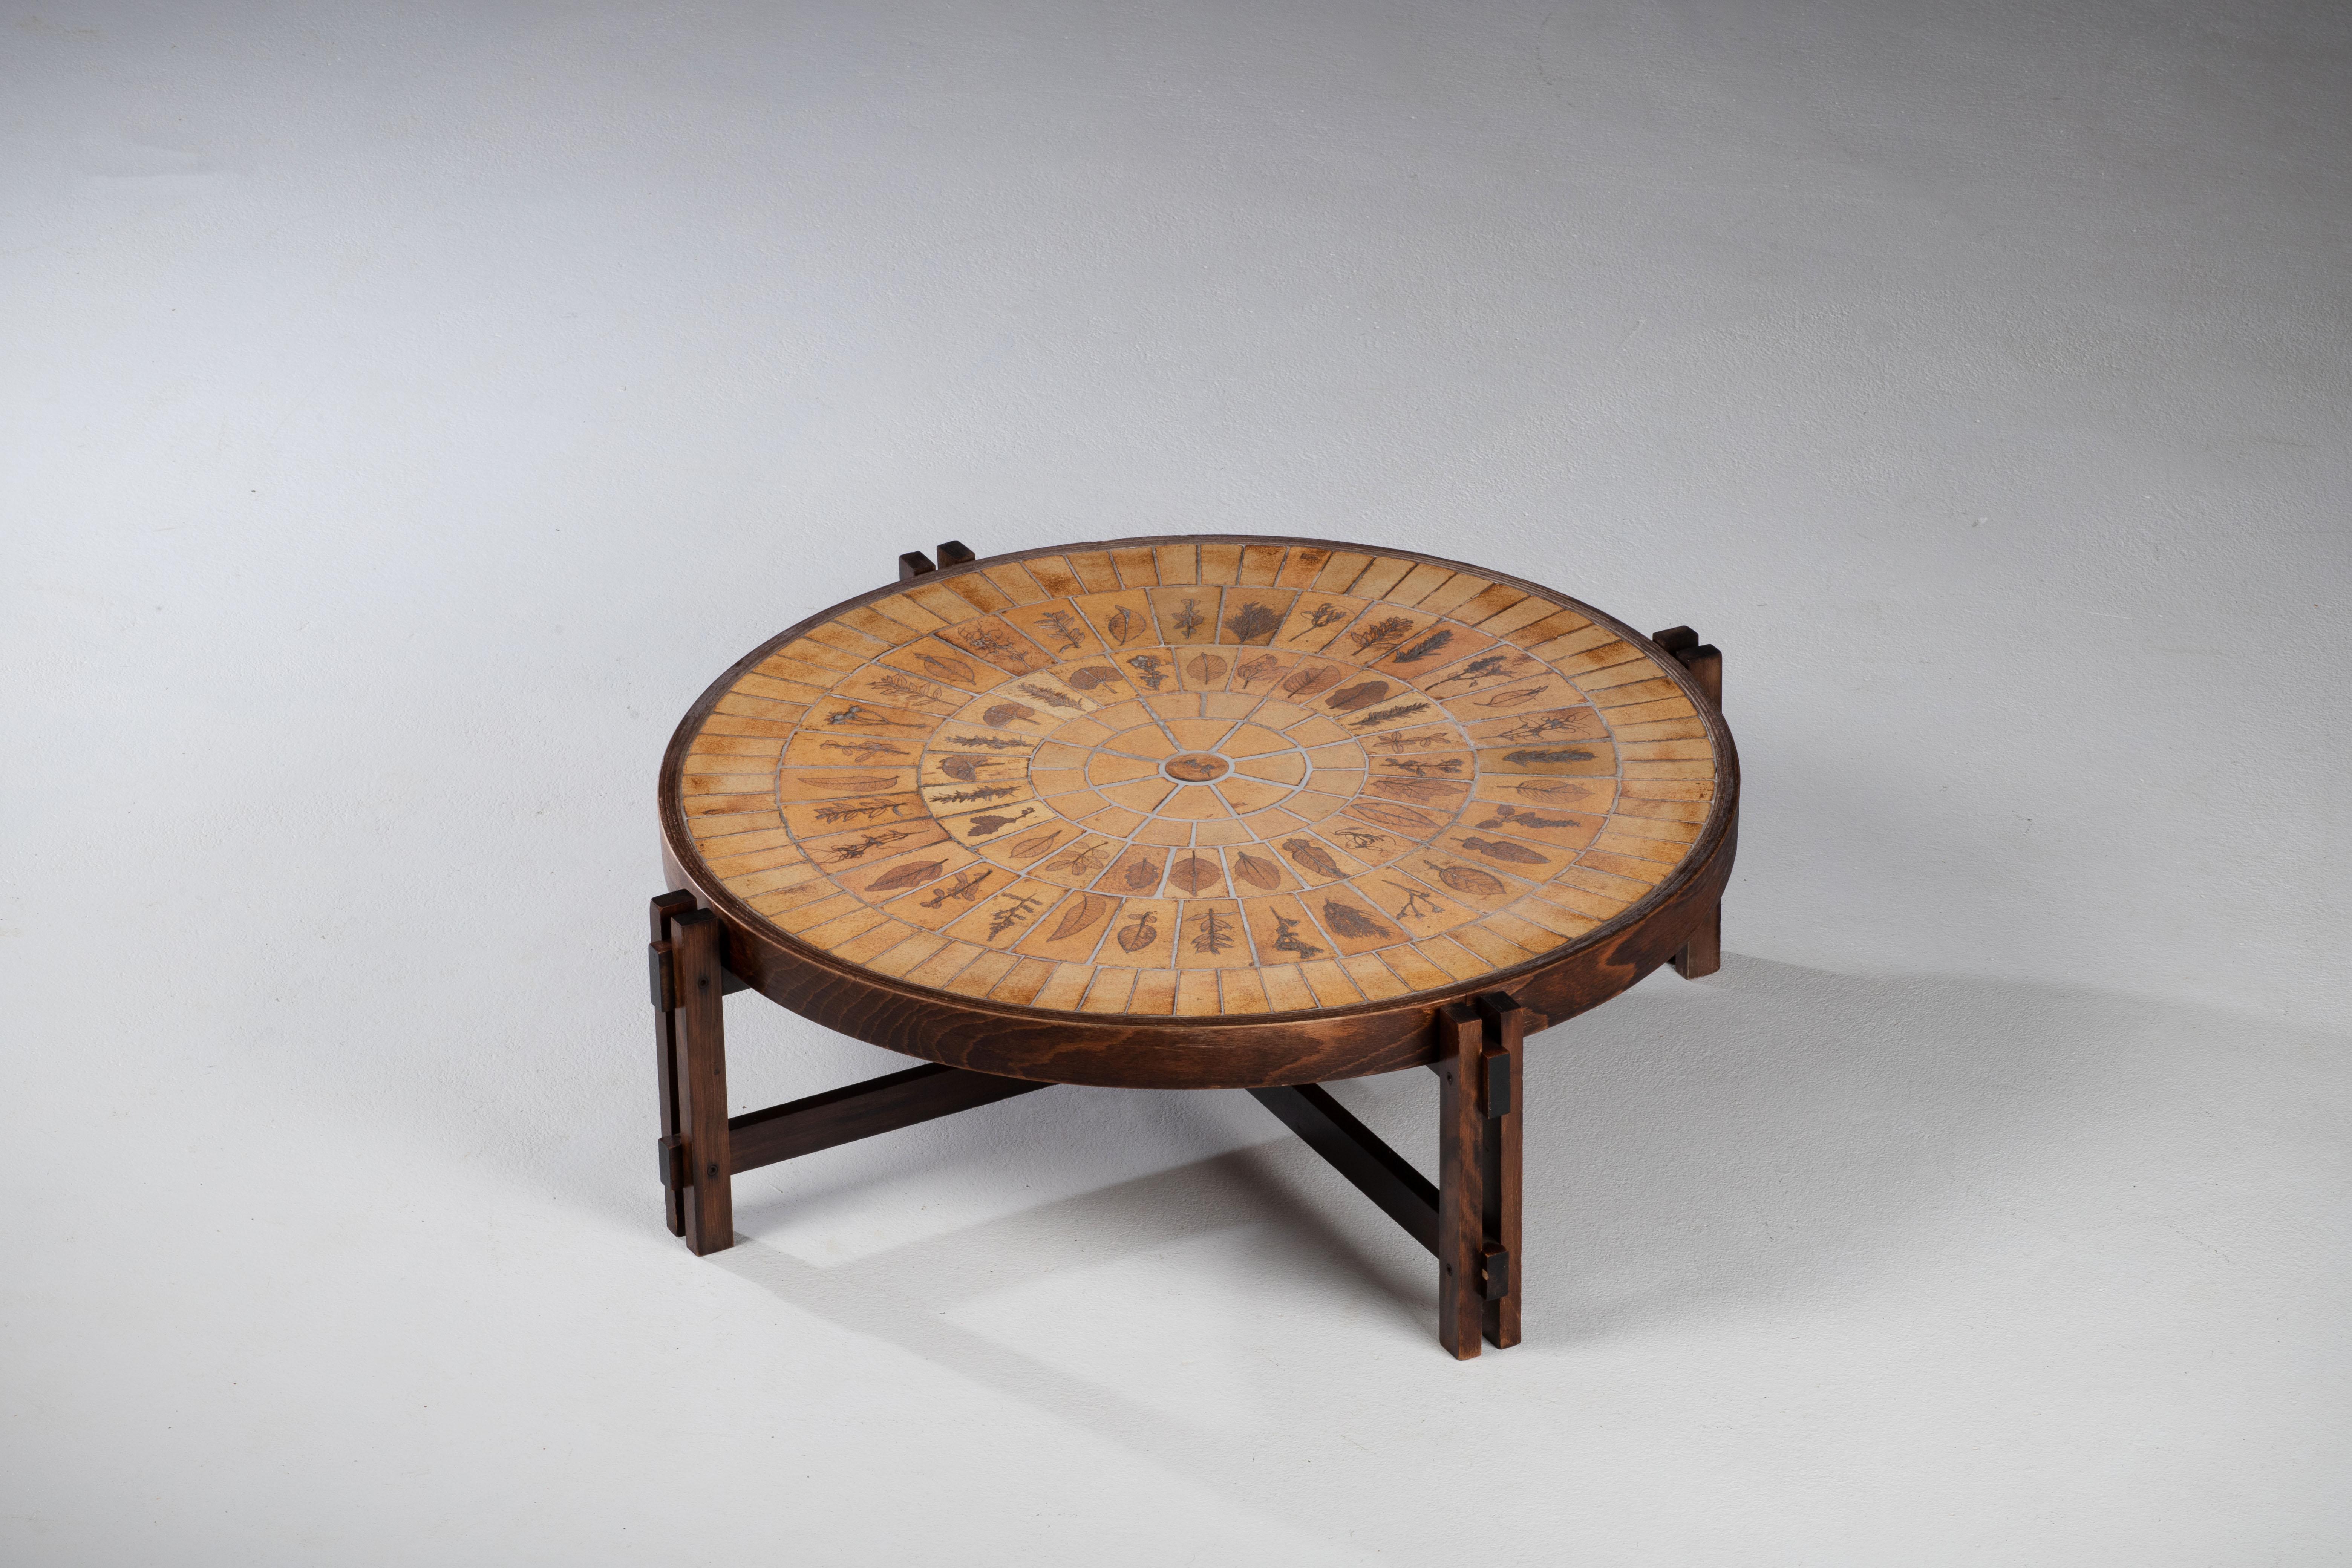 Coffee table, “Garrigue” model, round shape, top in ceramic tiles decorated with leaves, with a constructivist base in oak.
The 